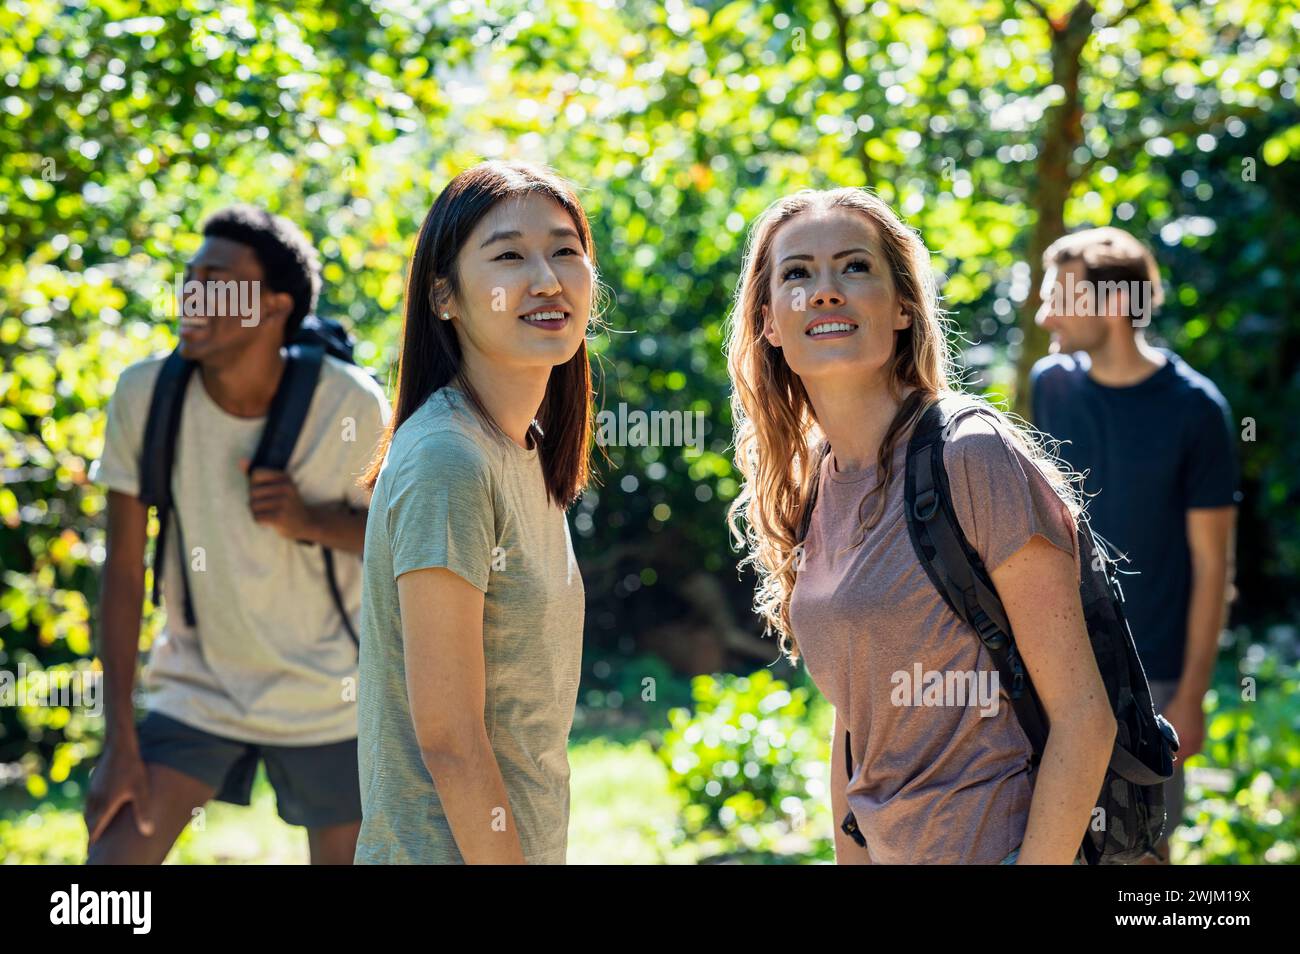 Two women looking up during hiking excursion Stock Photo